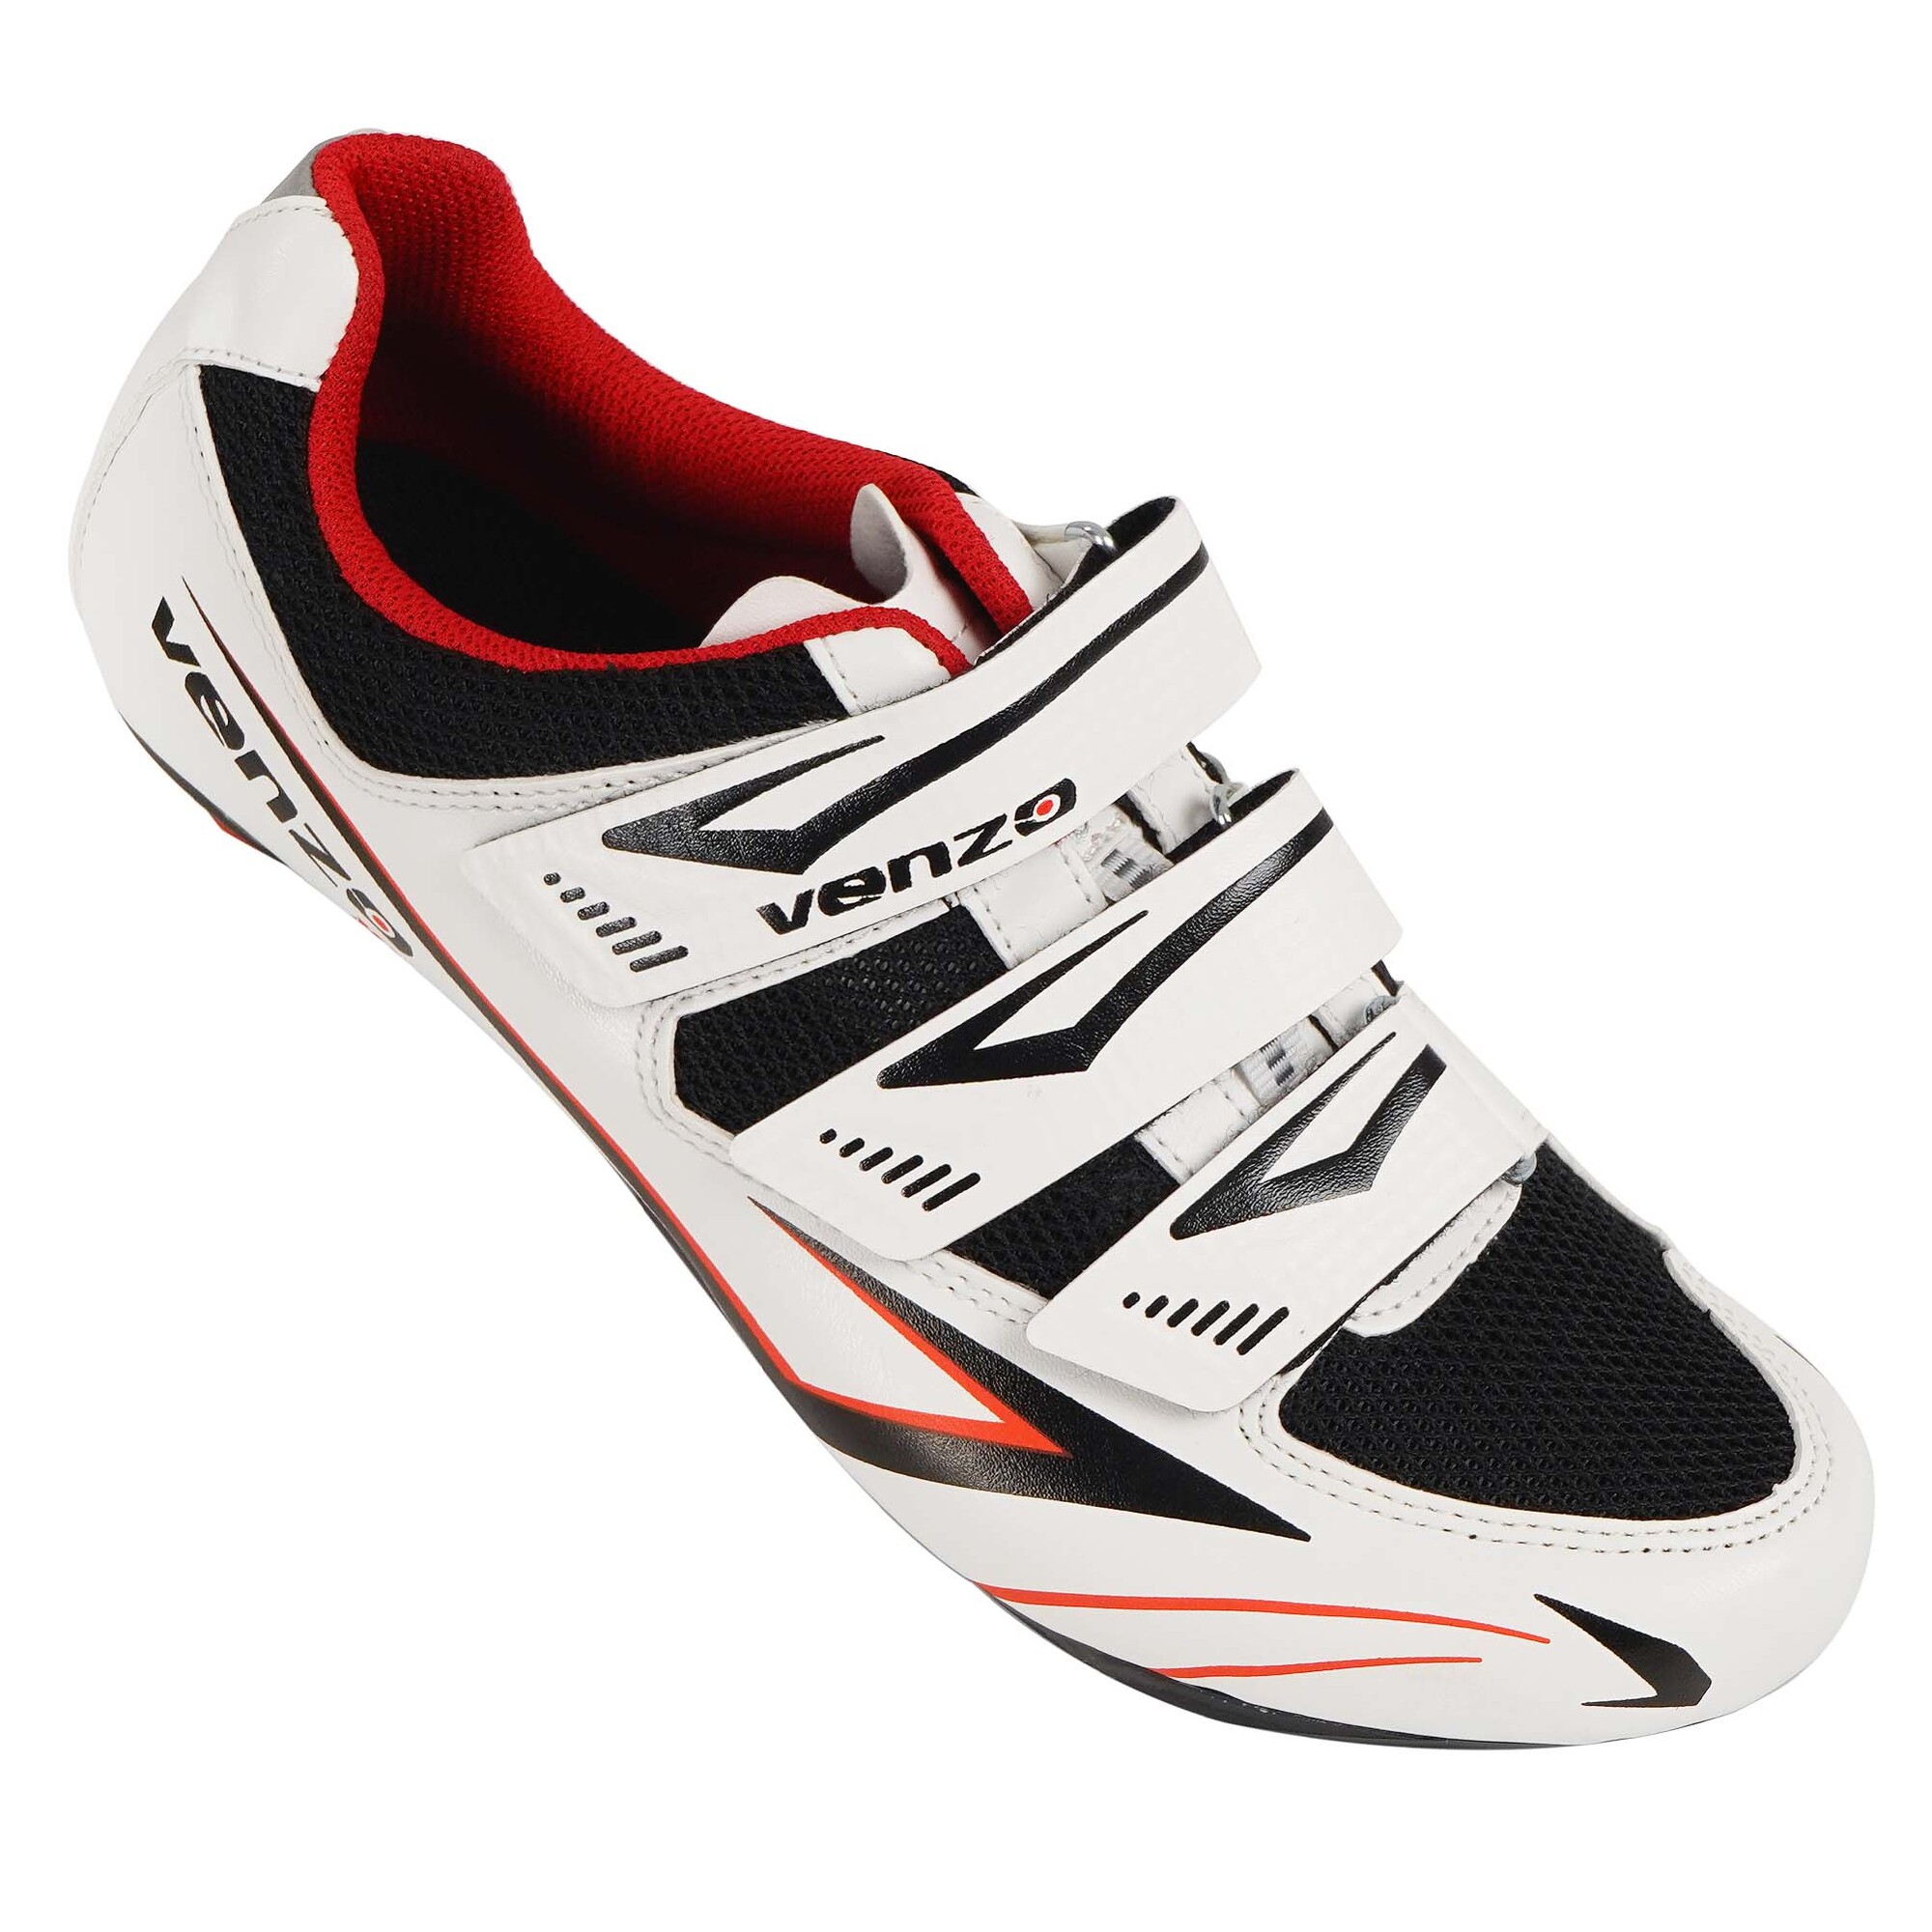 Venzo Road Bike For Shimano SPD SL Look Cycling Bicycle Shoes 45